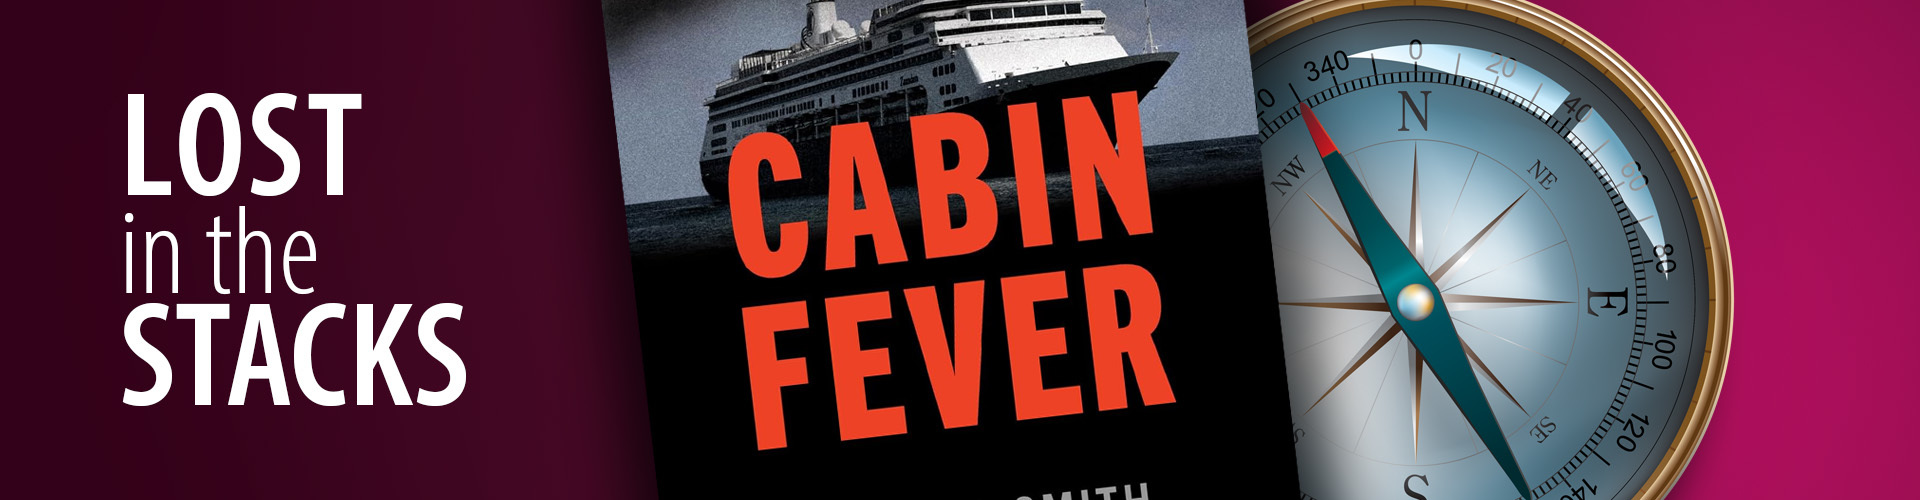 cabin fever featured 1920x500